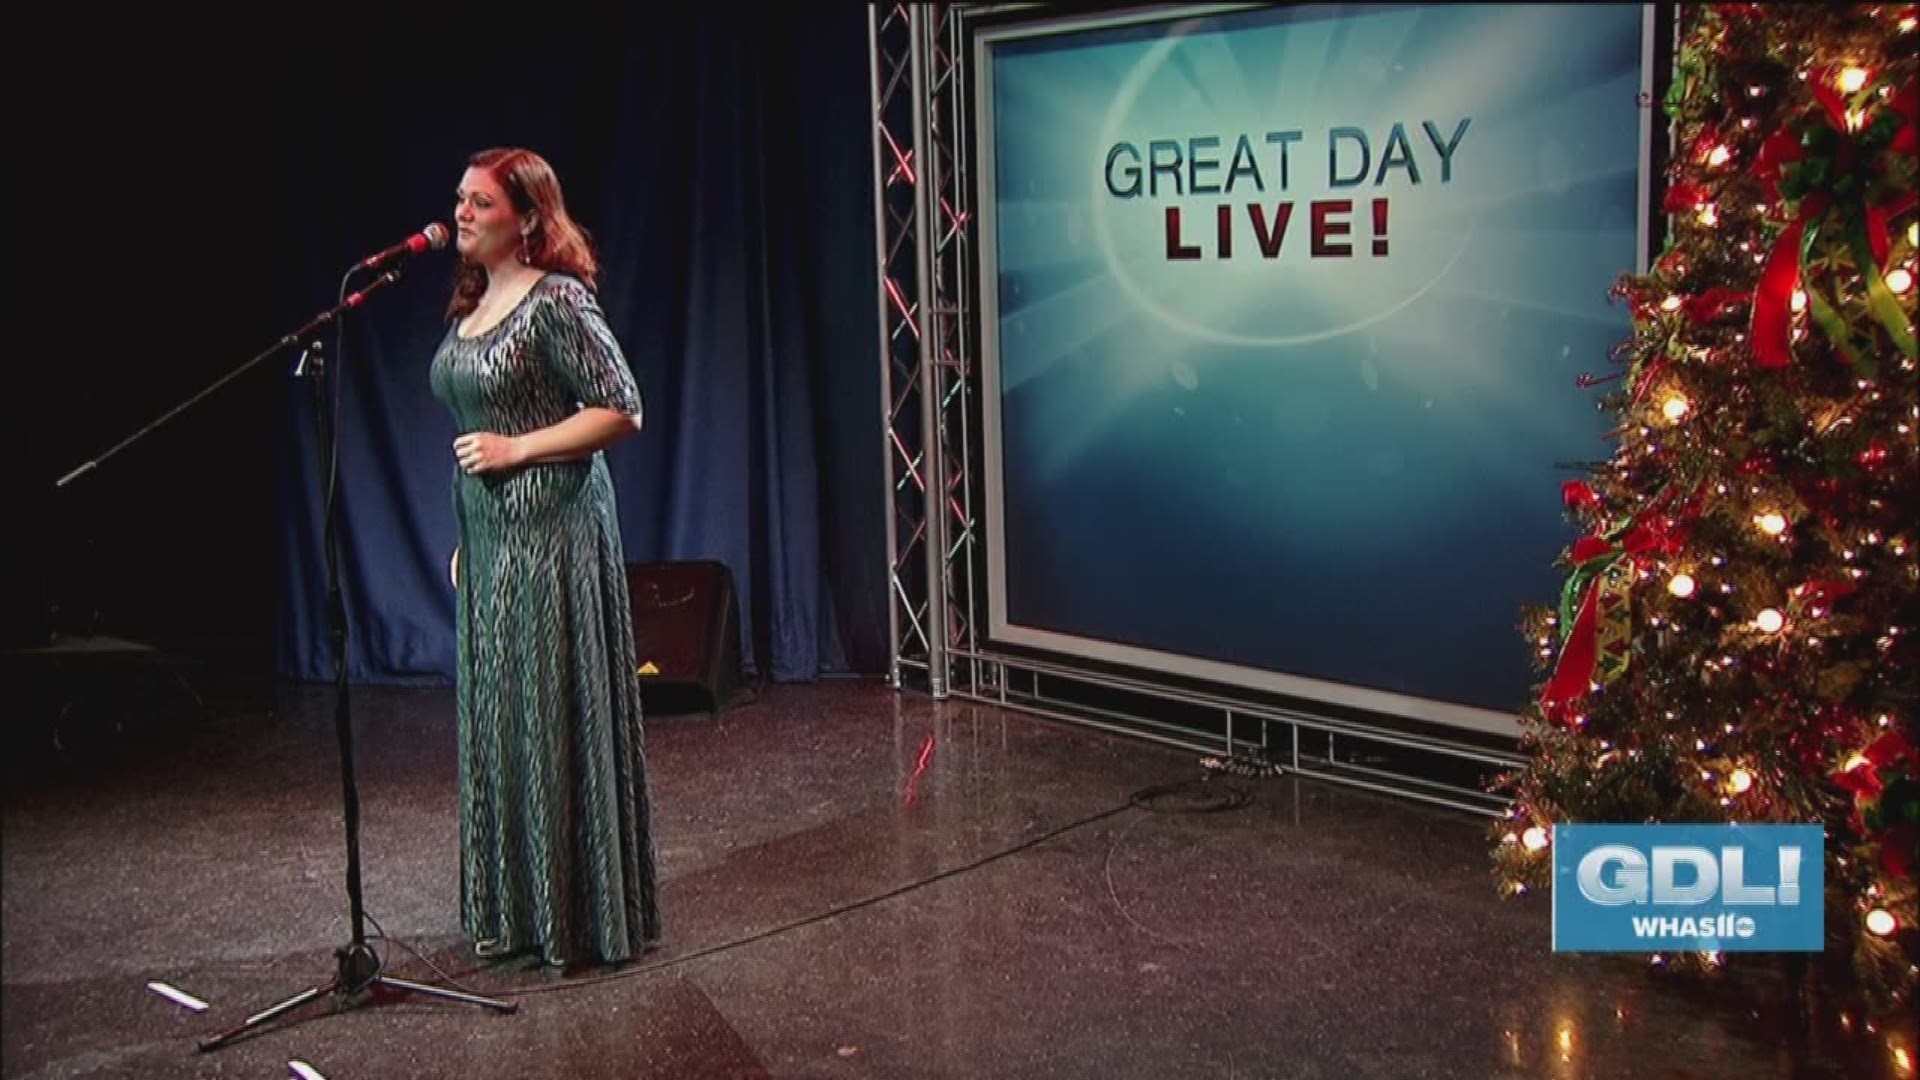 Former Miss Kentucky Whitney Trowbridge stopped by to perform on Great Day Live.